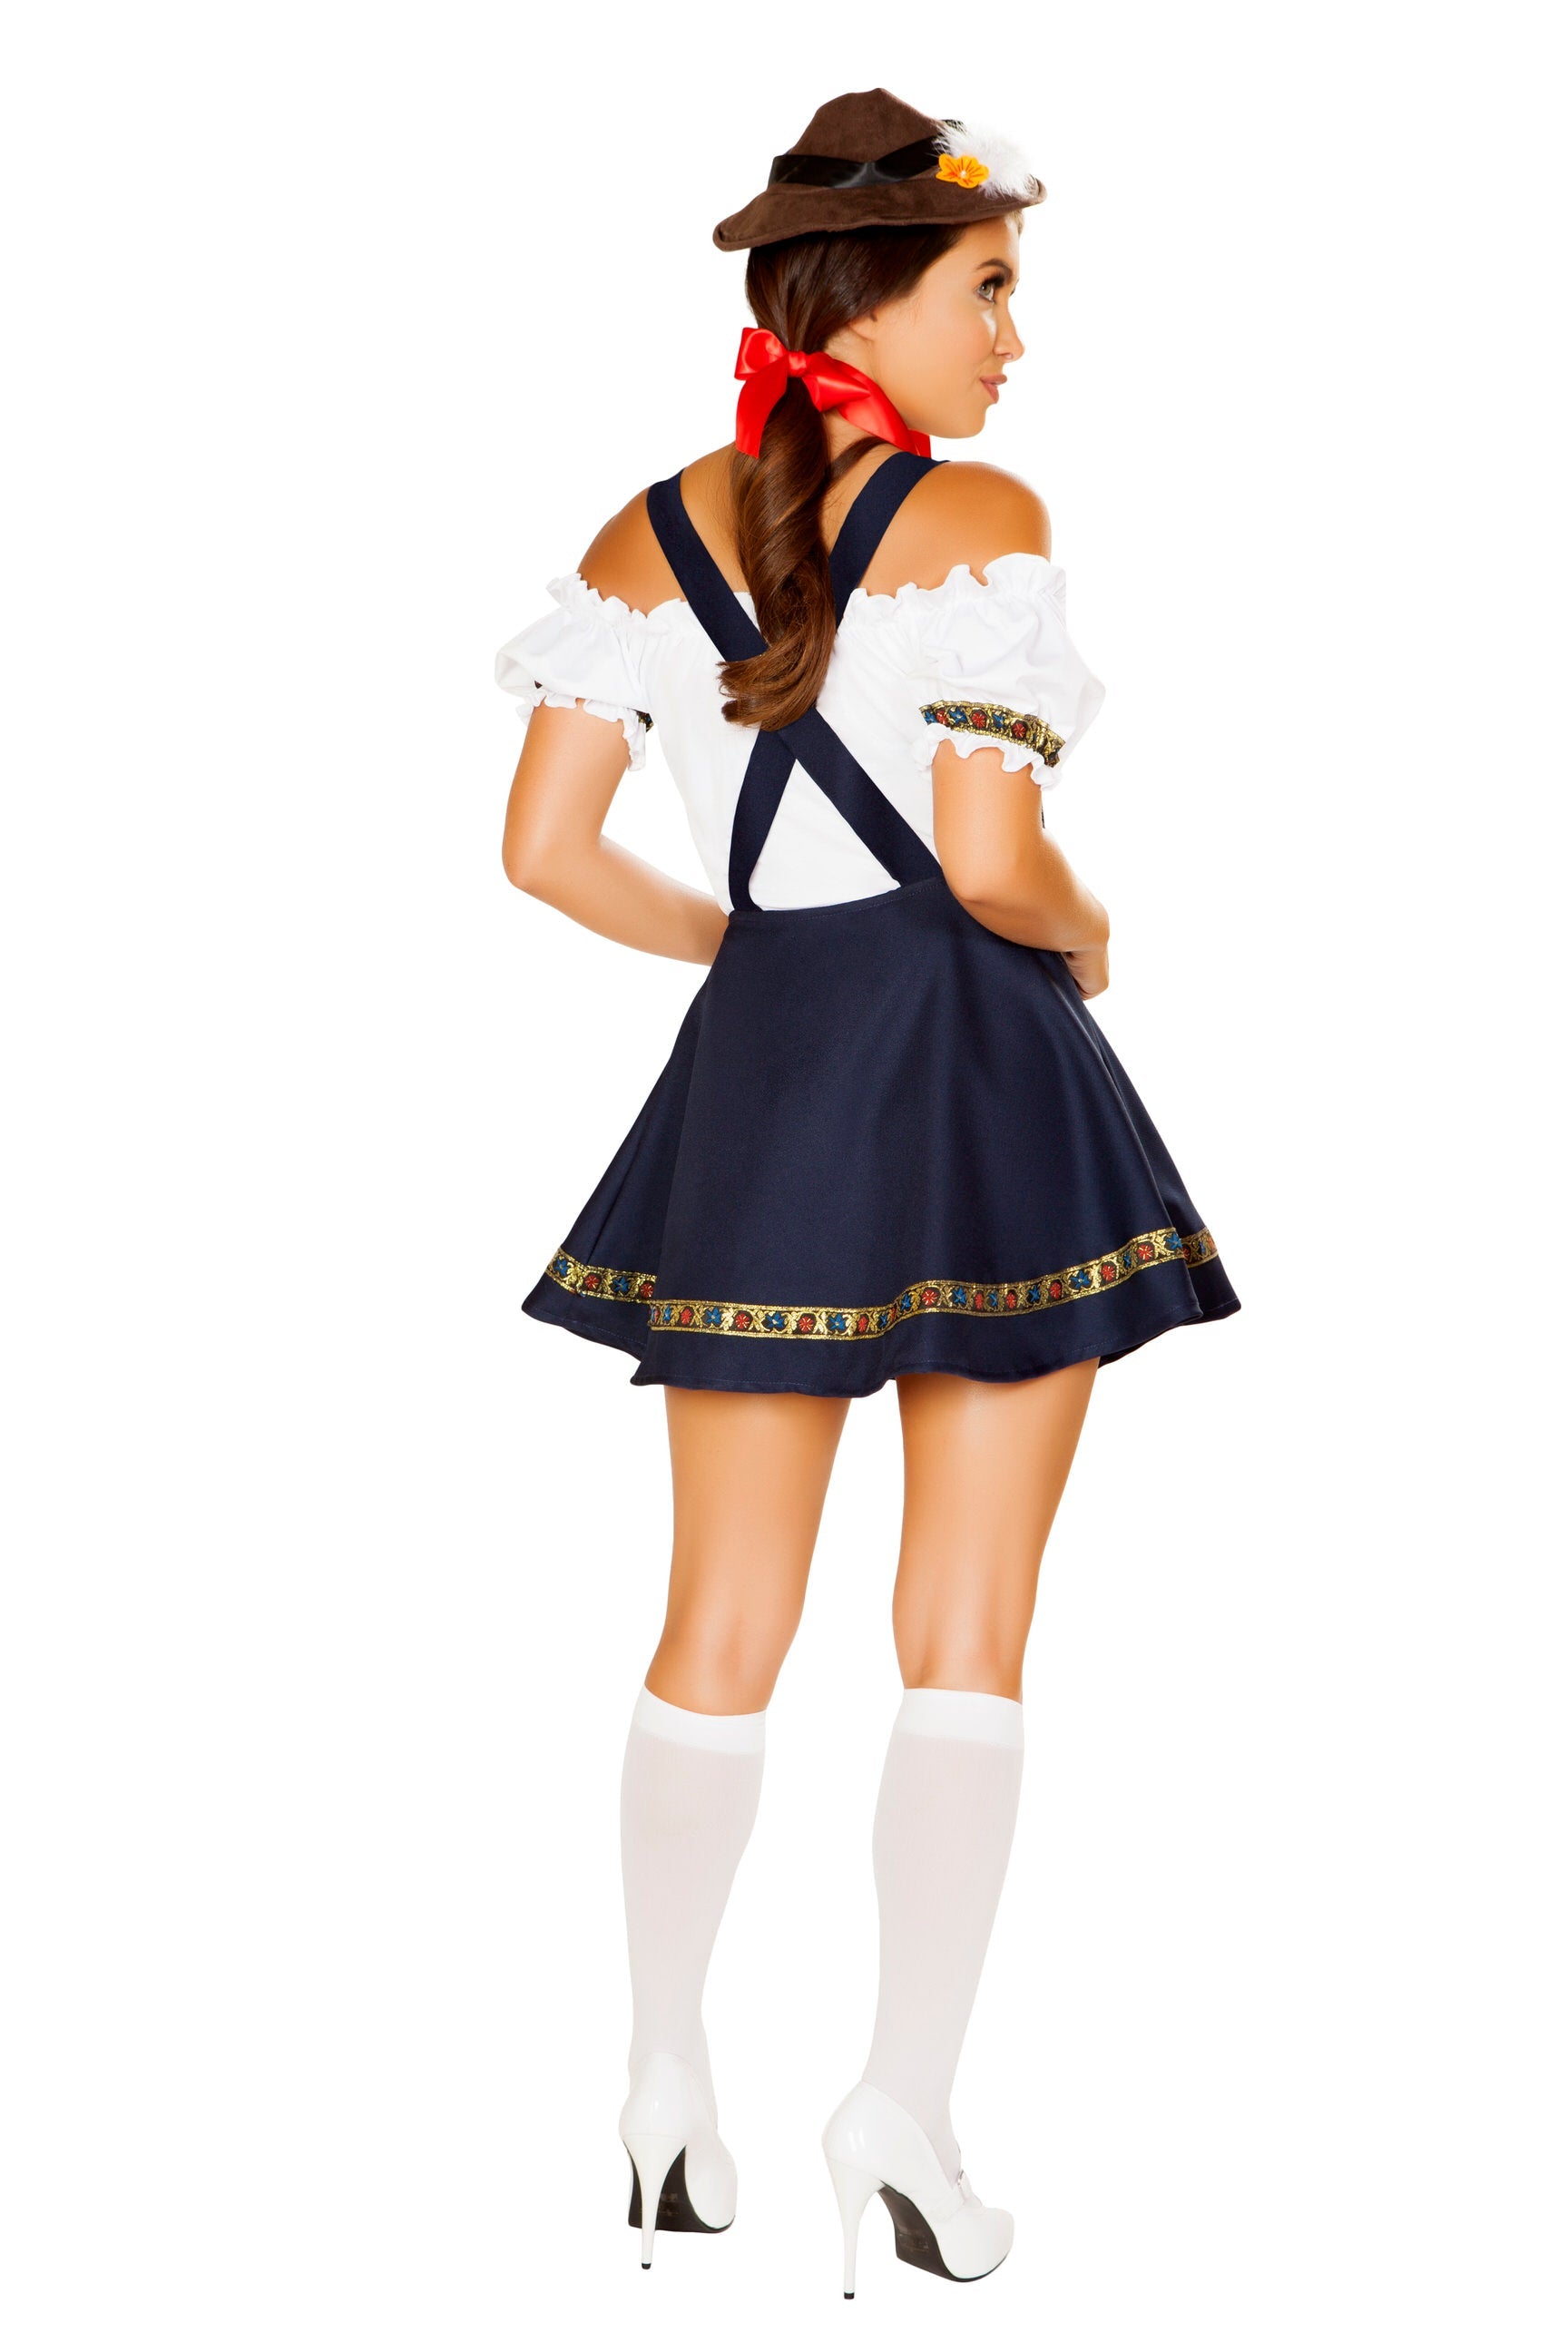 4884 - Roma Costume 3pc Bavarian Beauty Serving Wench